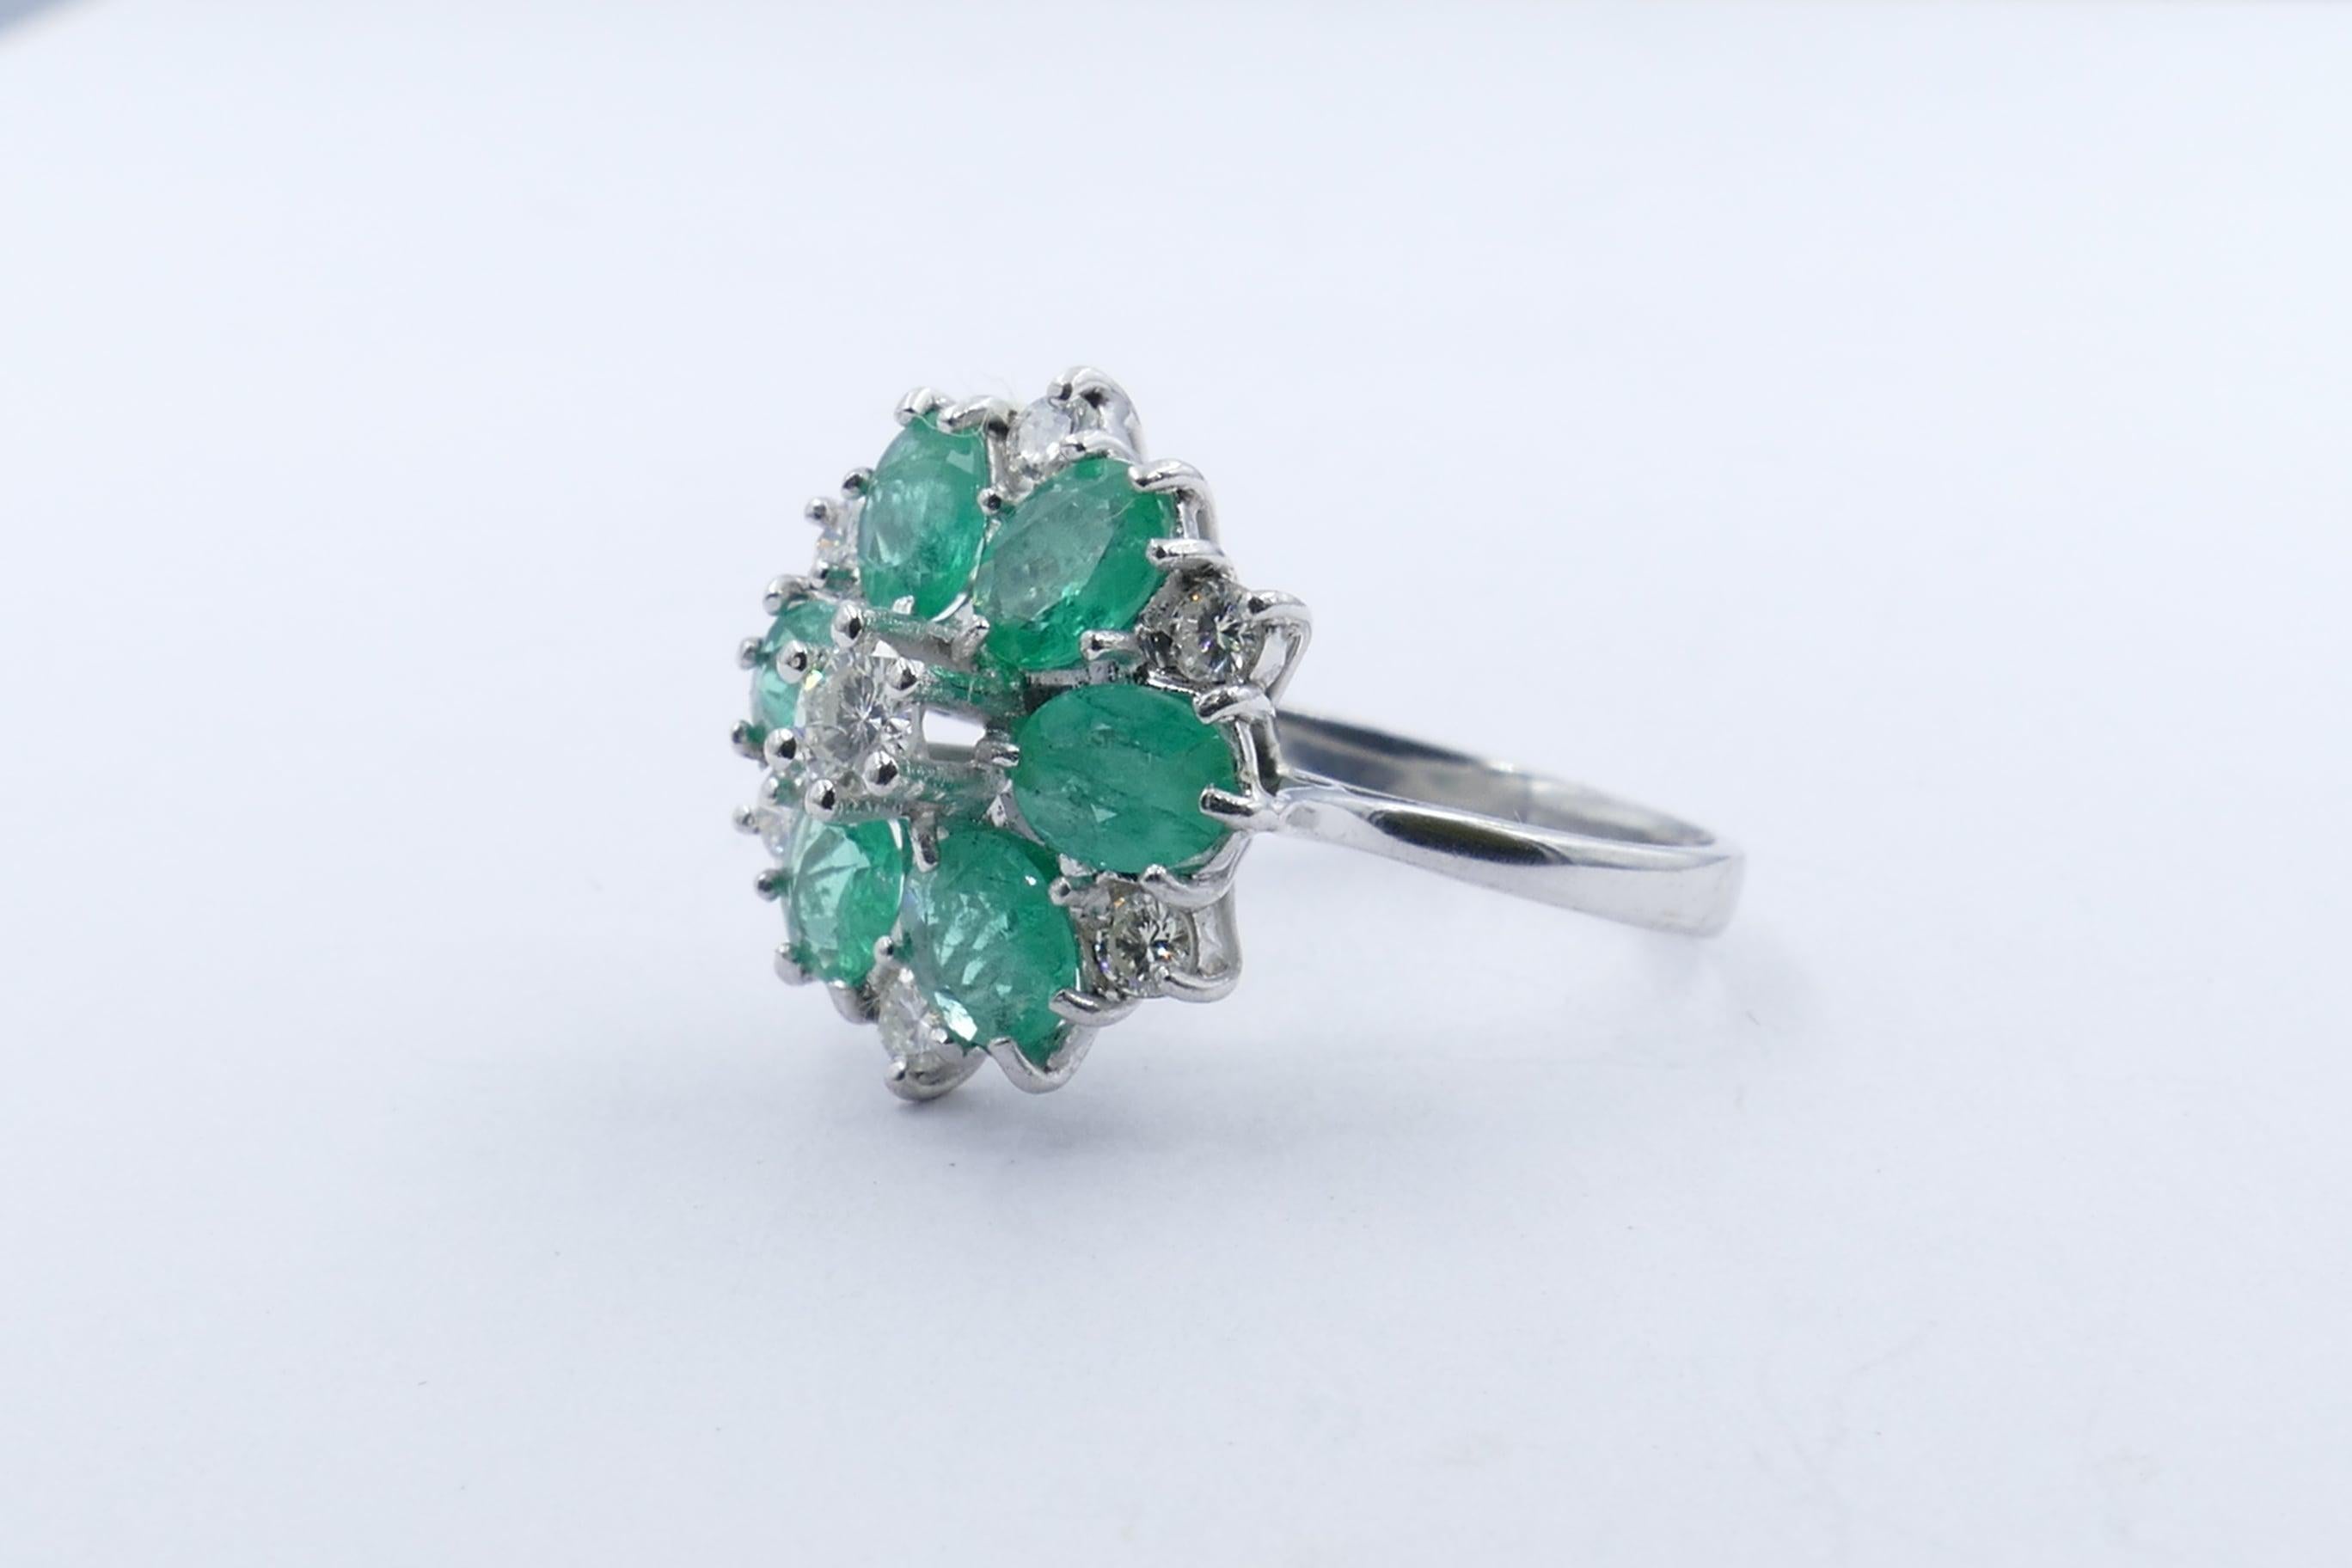 A pretty little Diamond, colour H-J, clarity VS2, 6 claw set is the centrepiece of this lovely Vintage Flower-like Ring.
Surrounding the Diamond are 6 bright bluish-green Emeralds with another 6 round brilliant cut Diamonds, colour G, clarity